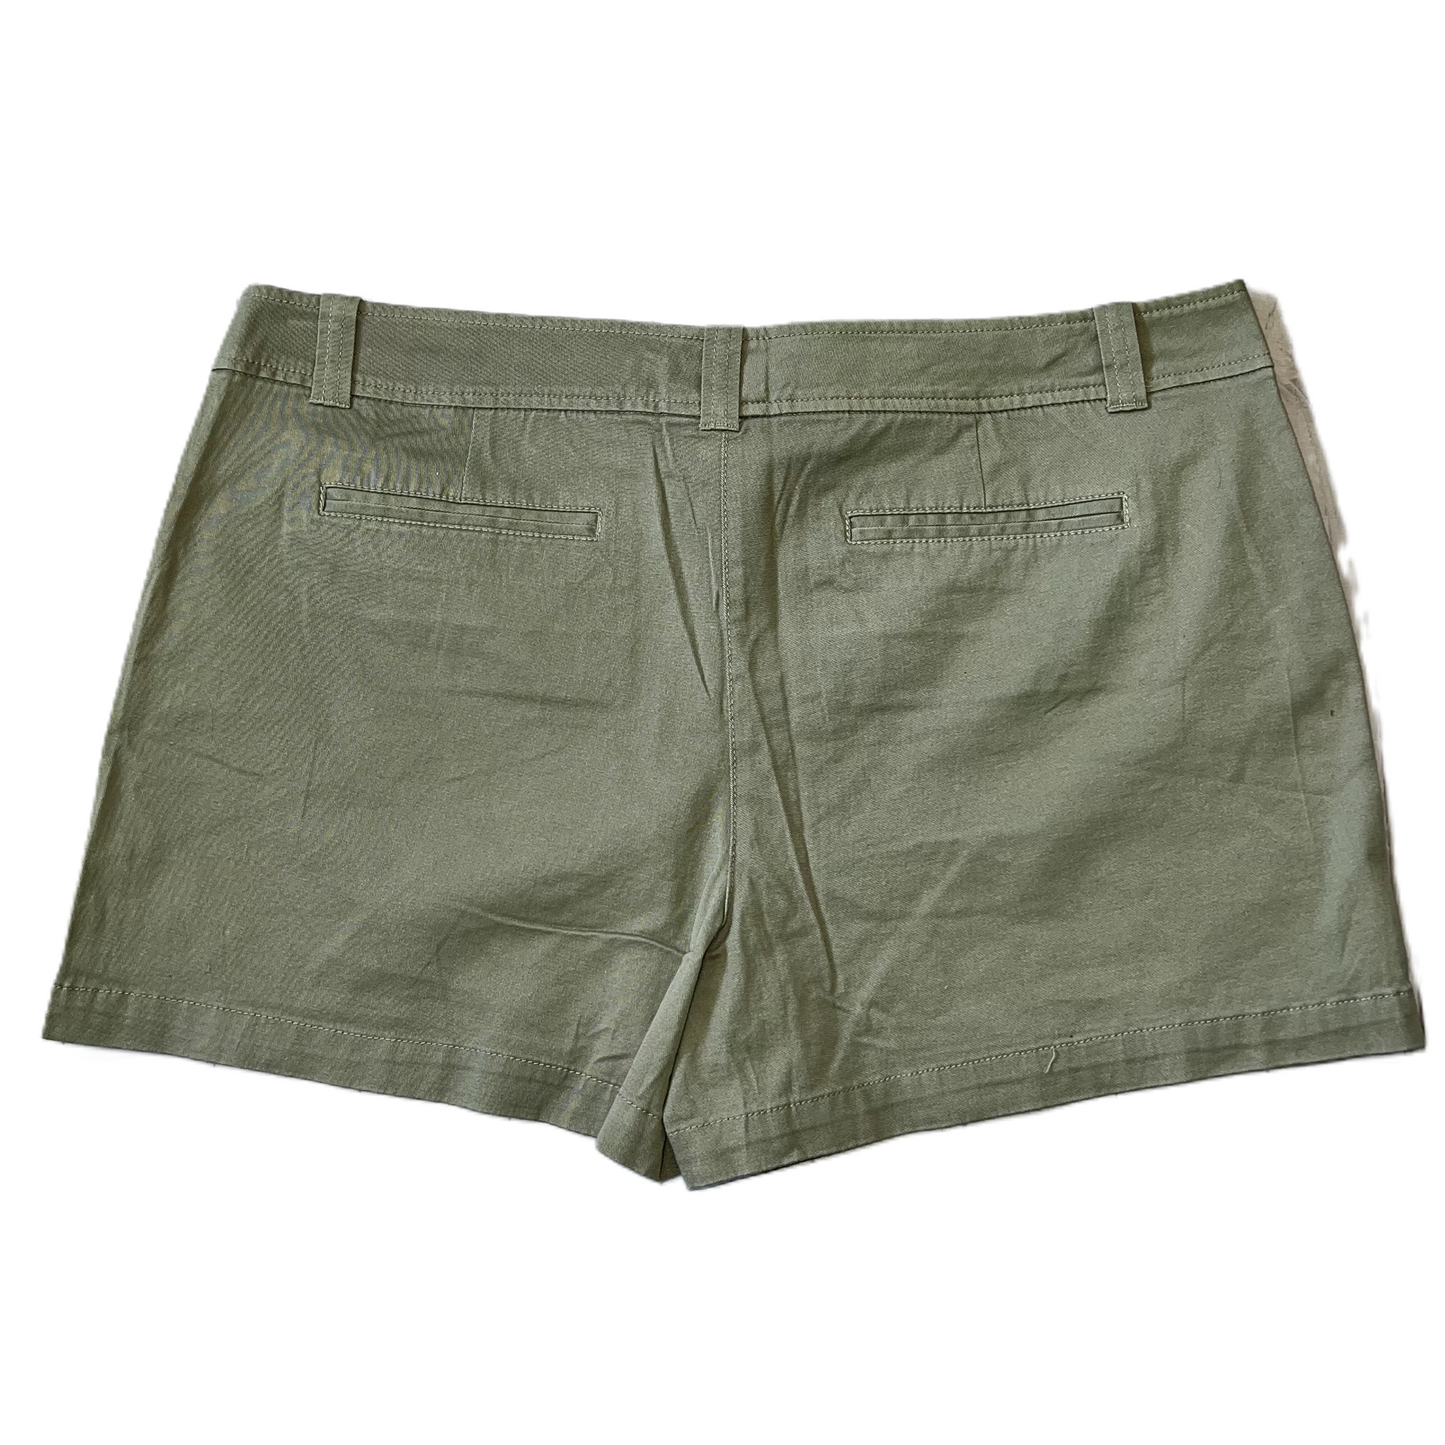 Green Shorts By New York And Co, Size: 16